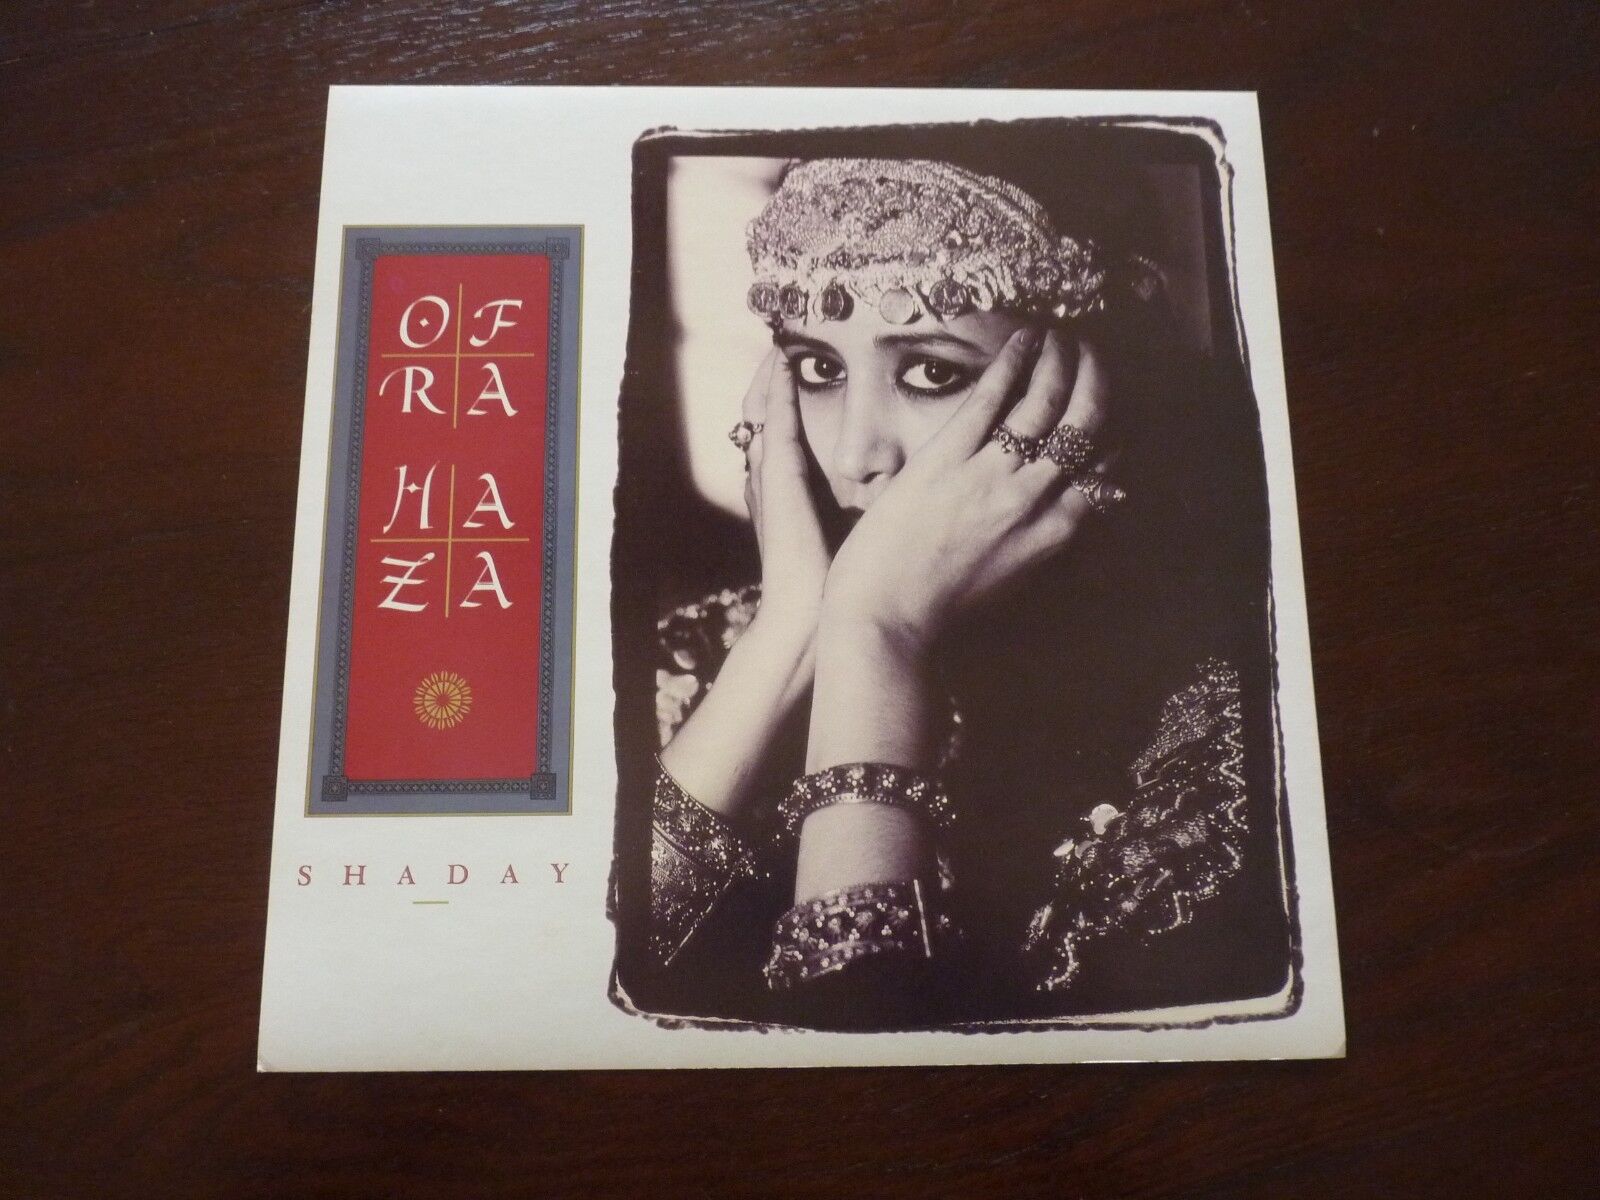 Ofra Haza Shaday Promo LP Record Photo Poster painting Flat 12x12 Poster